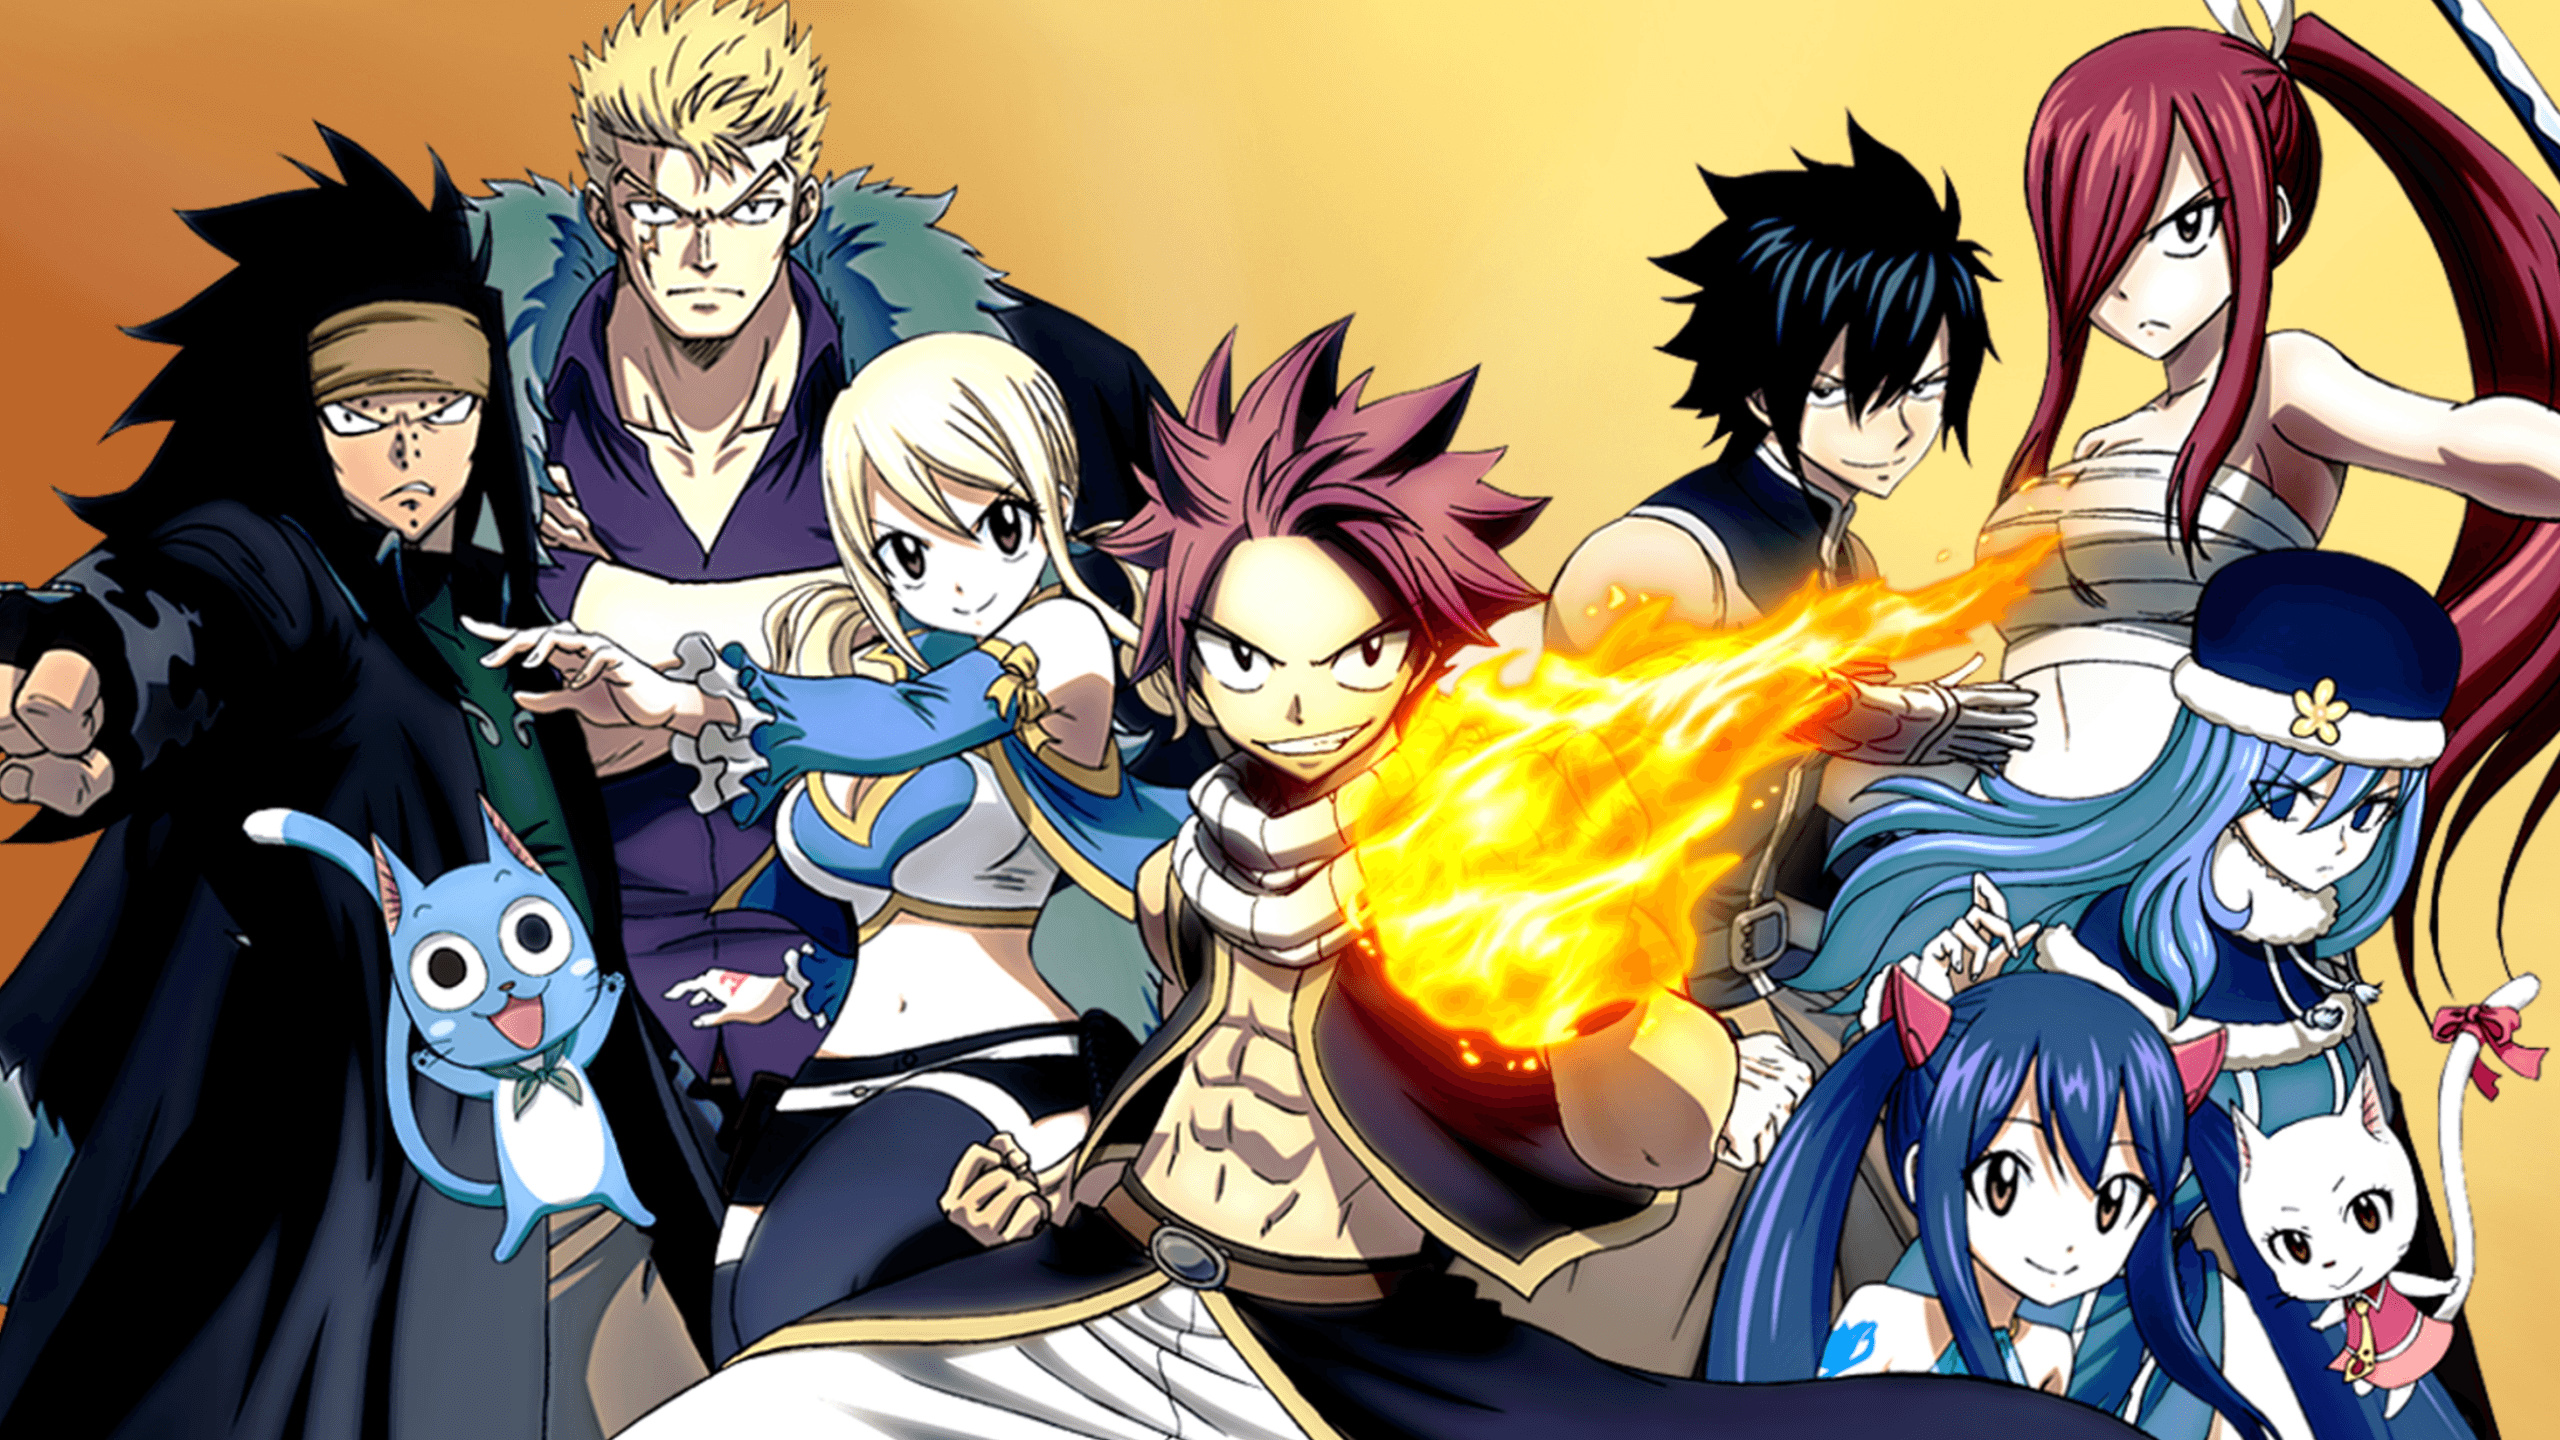 Happy (Fairy Tail): A young celestial wizard named Lucy Heartfilia, Natsu, Lucy, Characters. 2560x1440 HD Wallpaper.